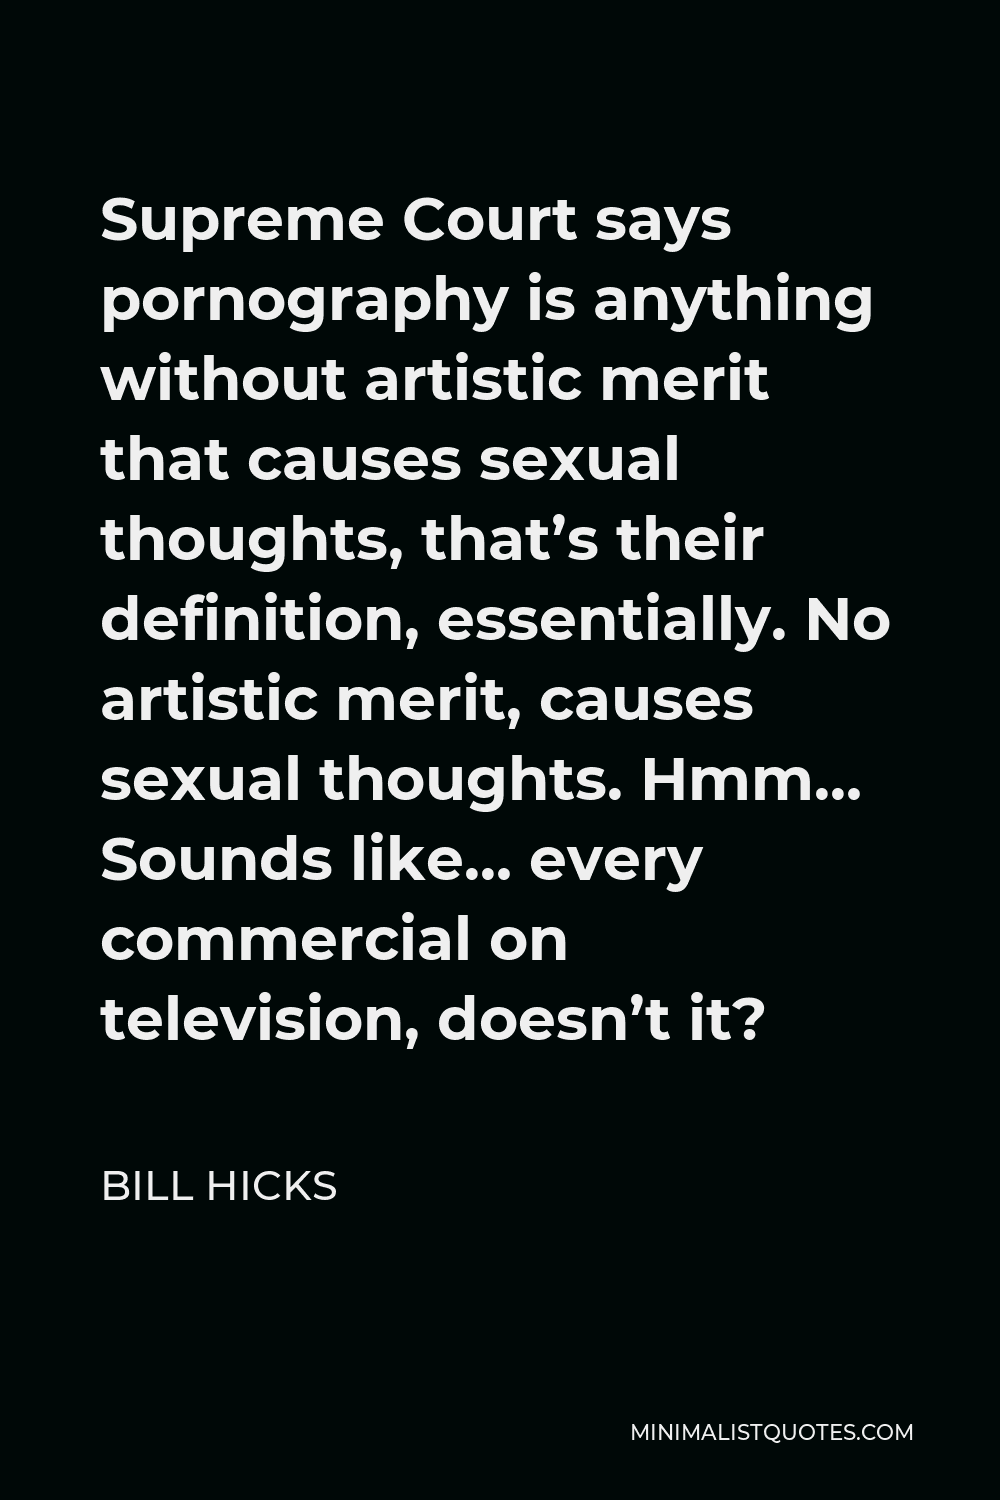 Bill Hicks Quote - Supreme Court says pornography is anything without artistic merit that causes sexual thoughts, that’s their definition, essentially. No artistic merit, causes sexual thoughts. Hmm… Sounds like… every commercial on television, doesn’t it?